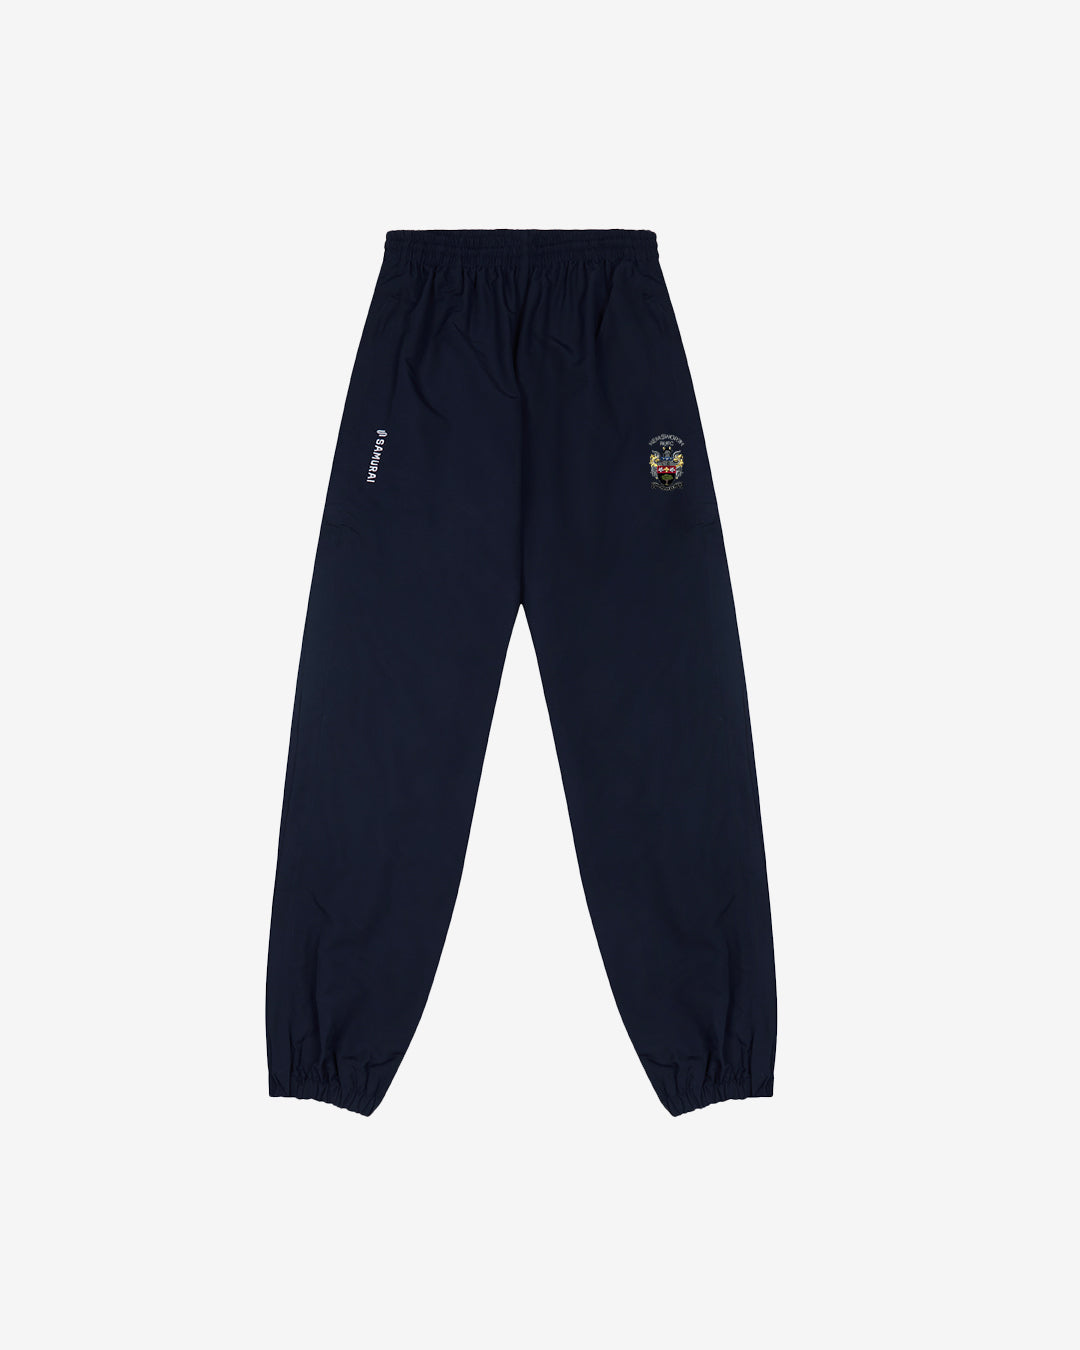 Hemsworth RUFC - EP:0104 - Southland Track Pant 2.0 - Navy